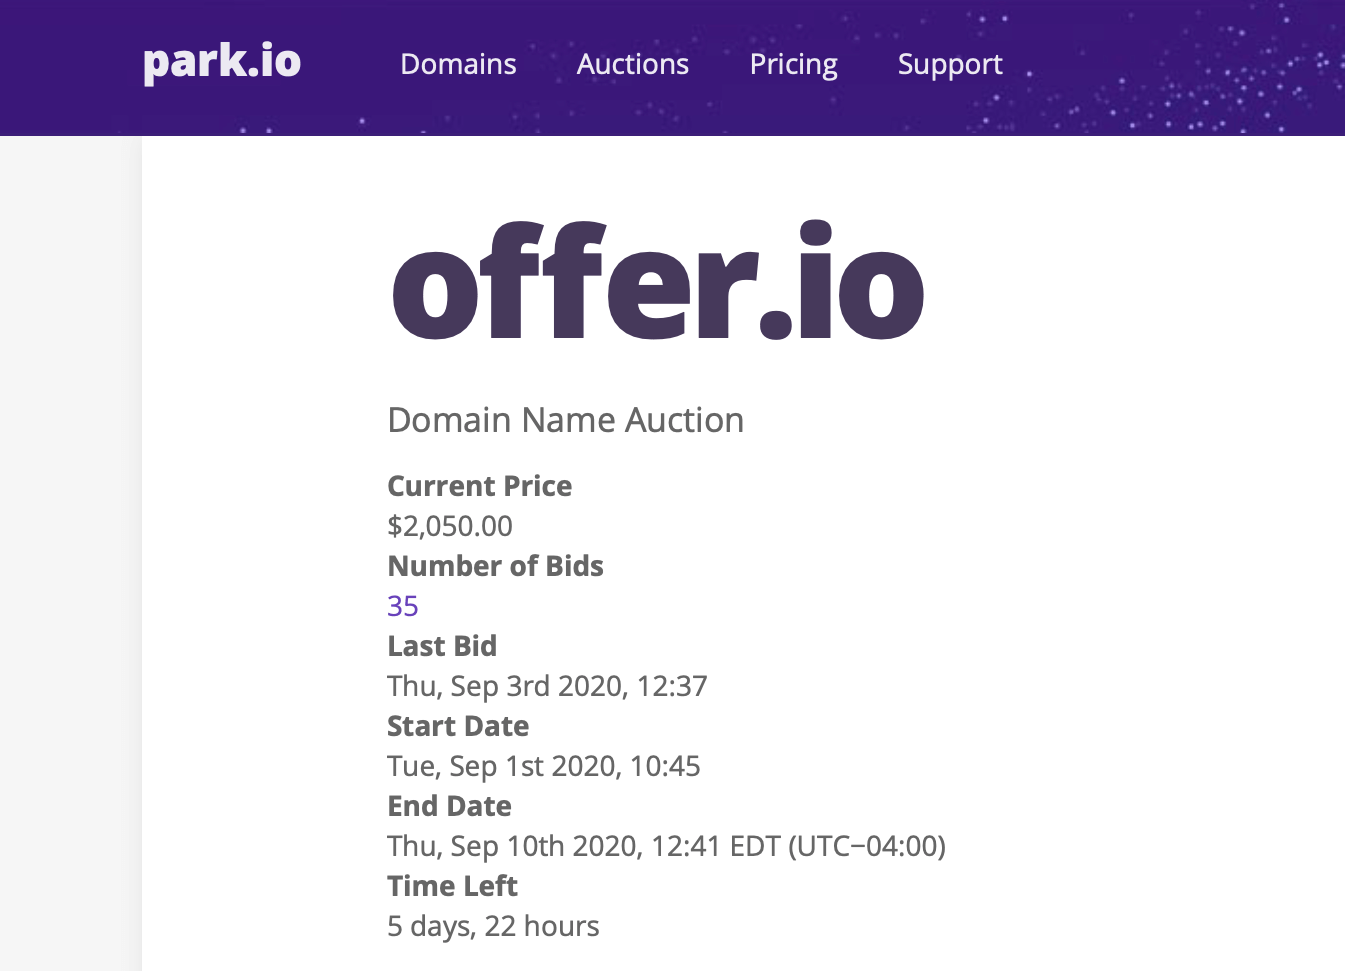 Could Offer.io be a record-breaking sale on Park.io?